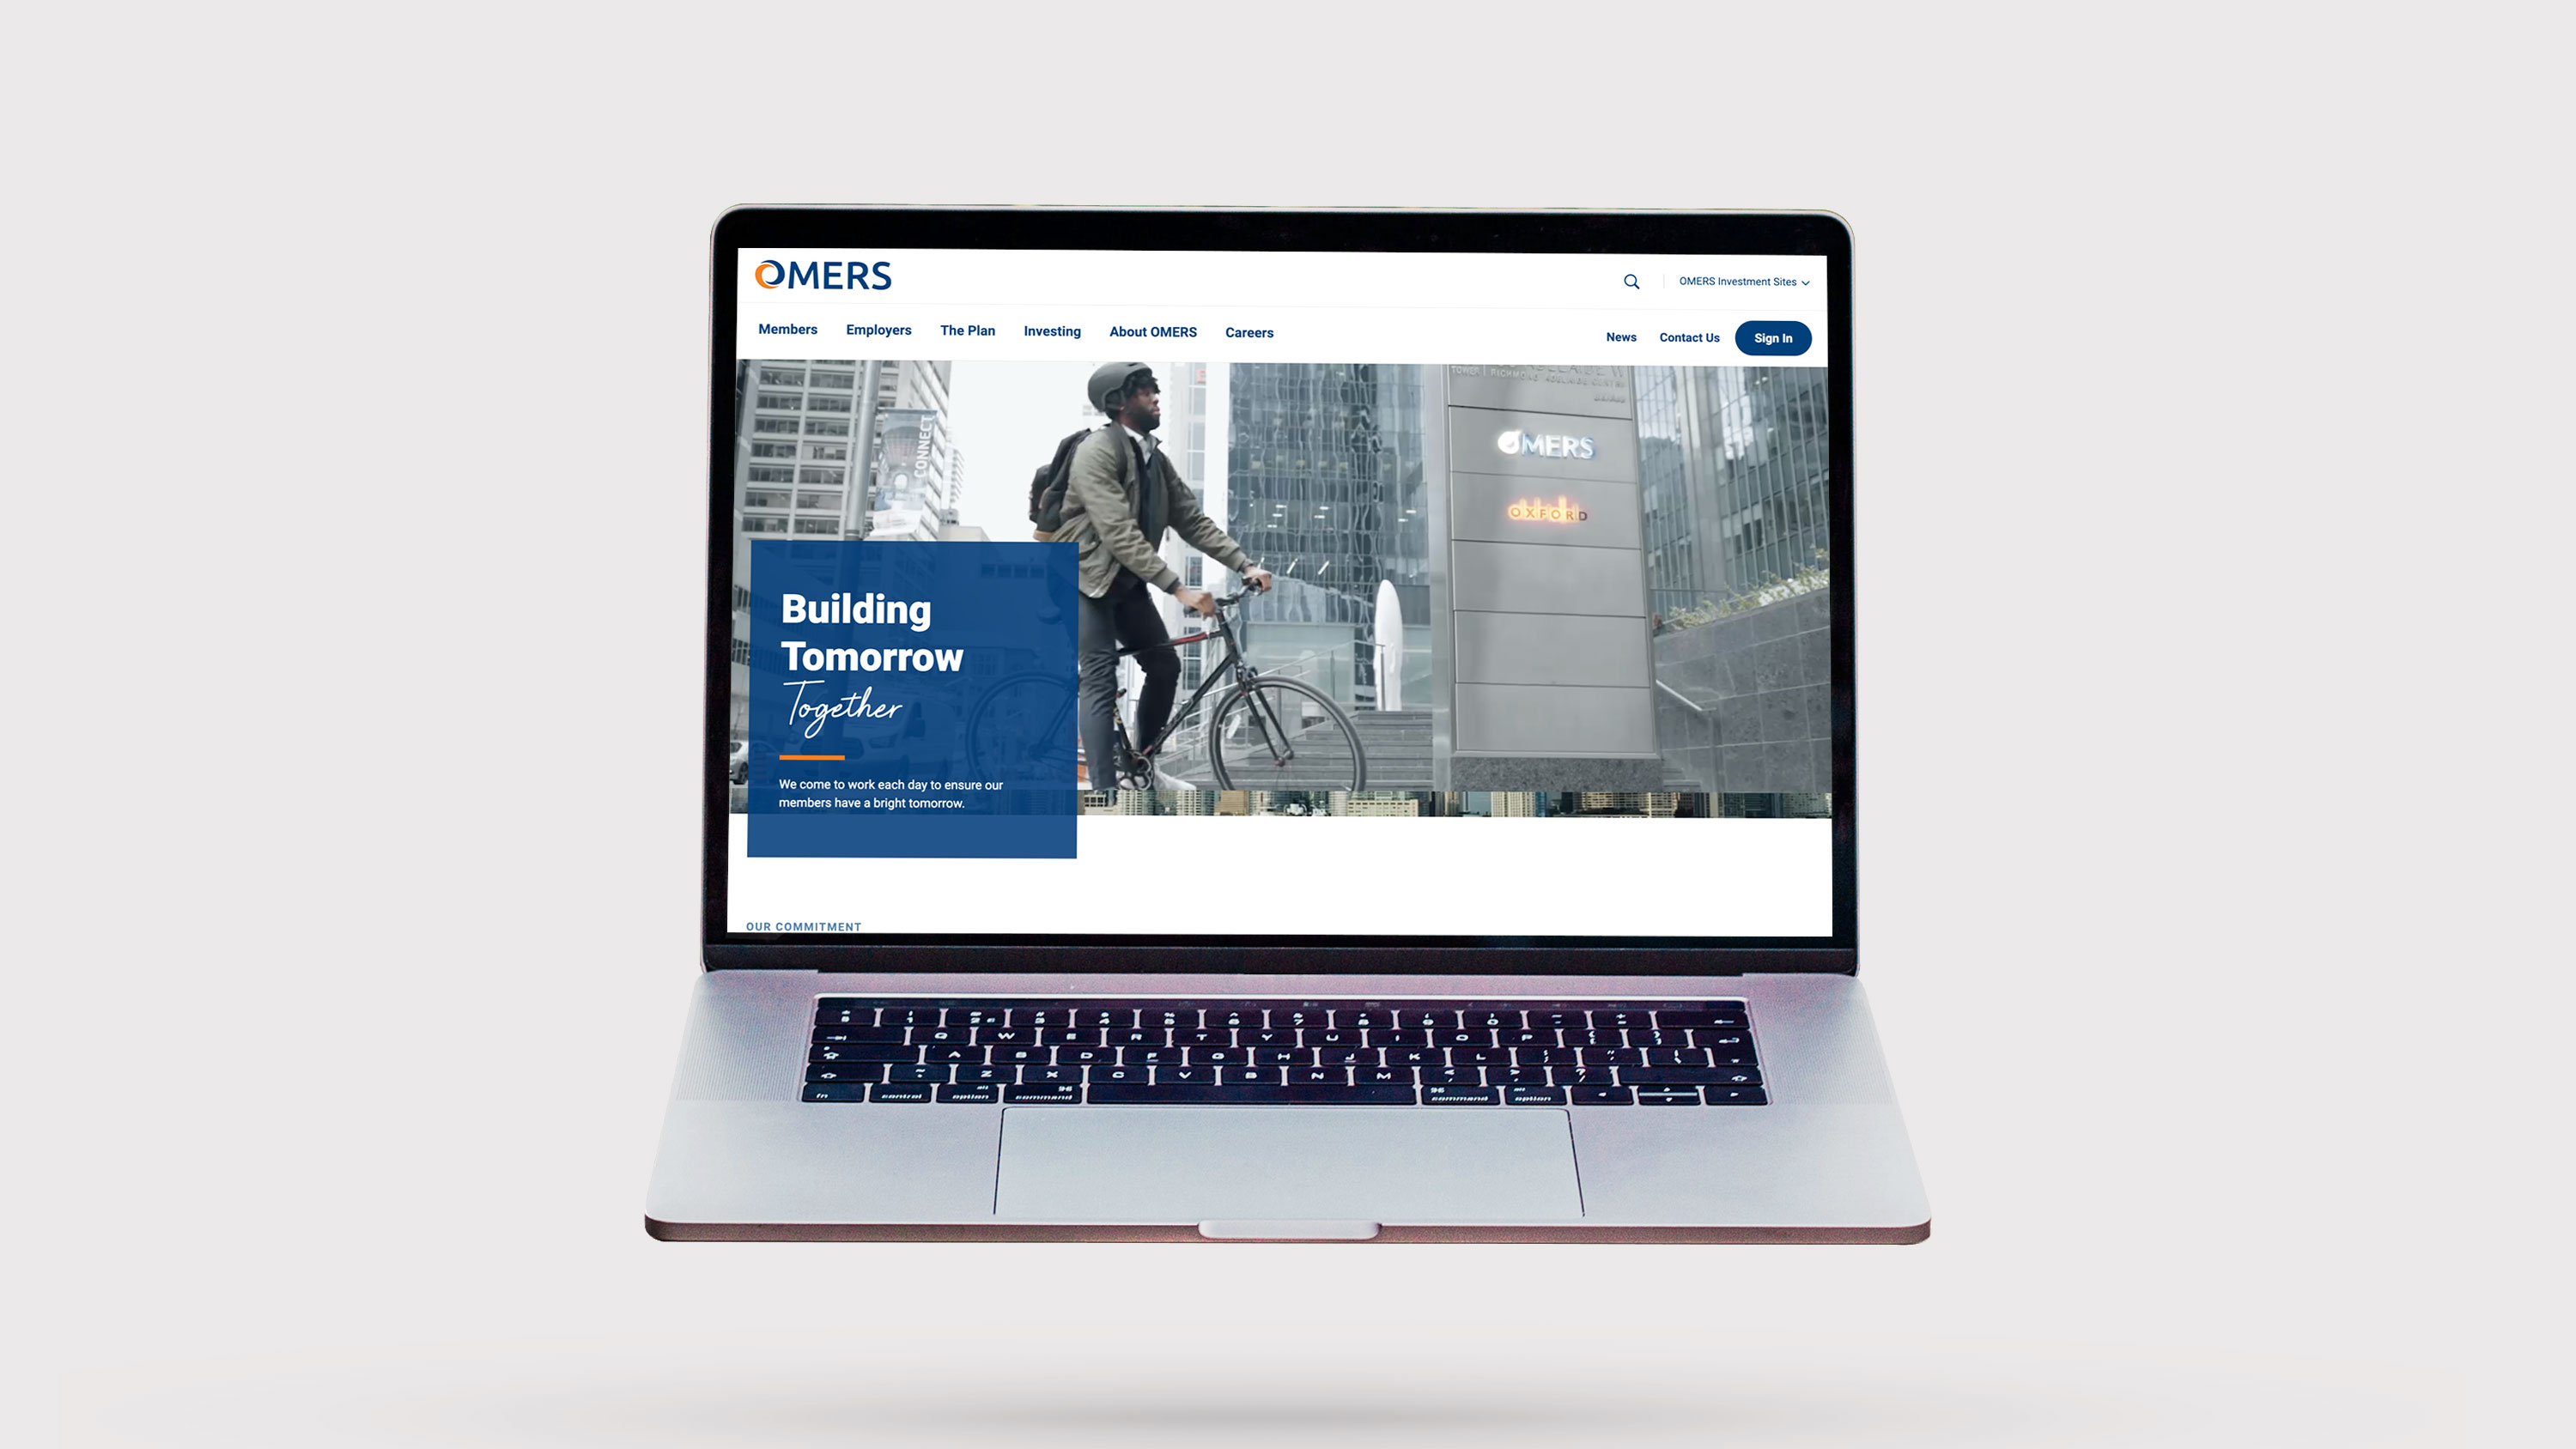 OMERS rejuvenated landing page on a laptop